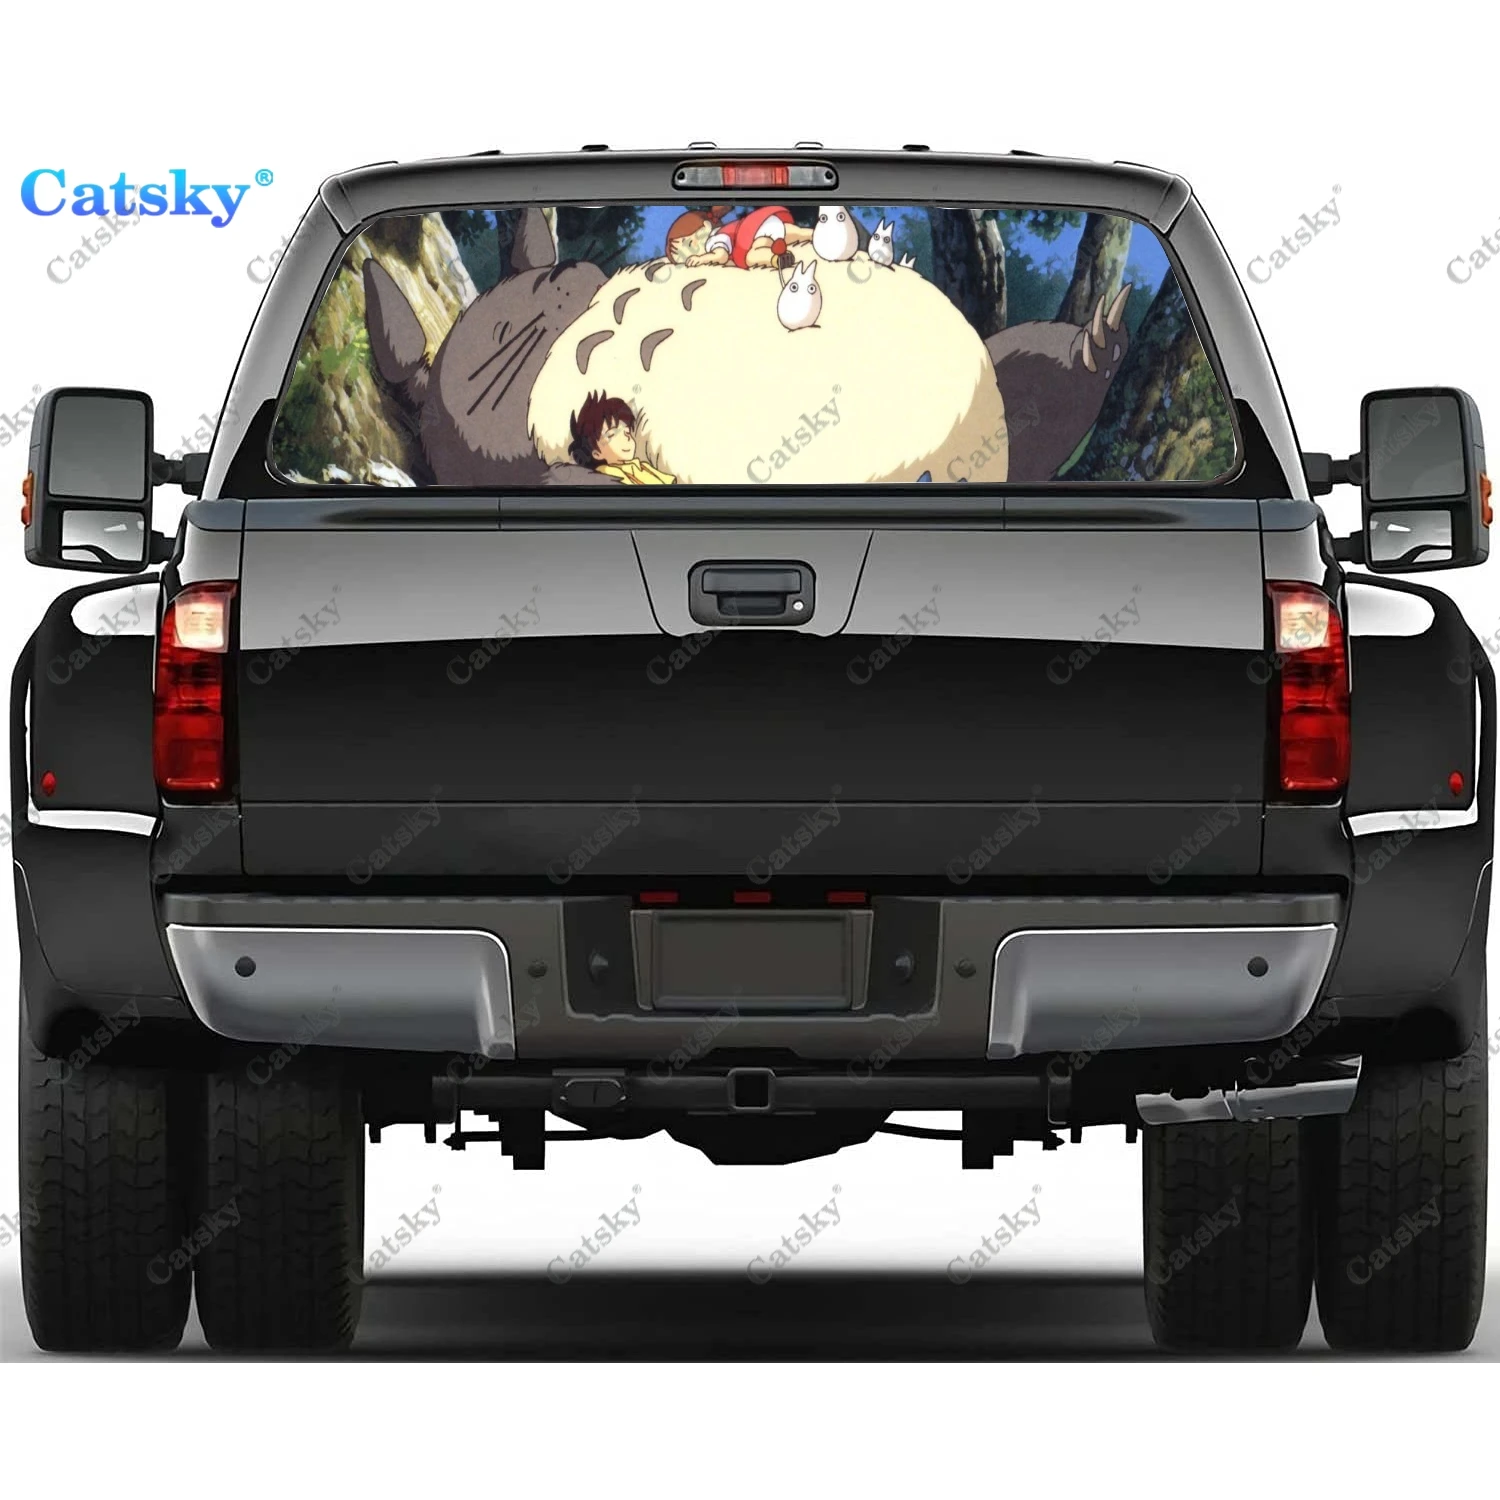 

Anime Totoro Printing Rear Window Stickers Windshield Decal Truck Rear Window Decal Universal Tint Perforated Vinyl Graphic